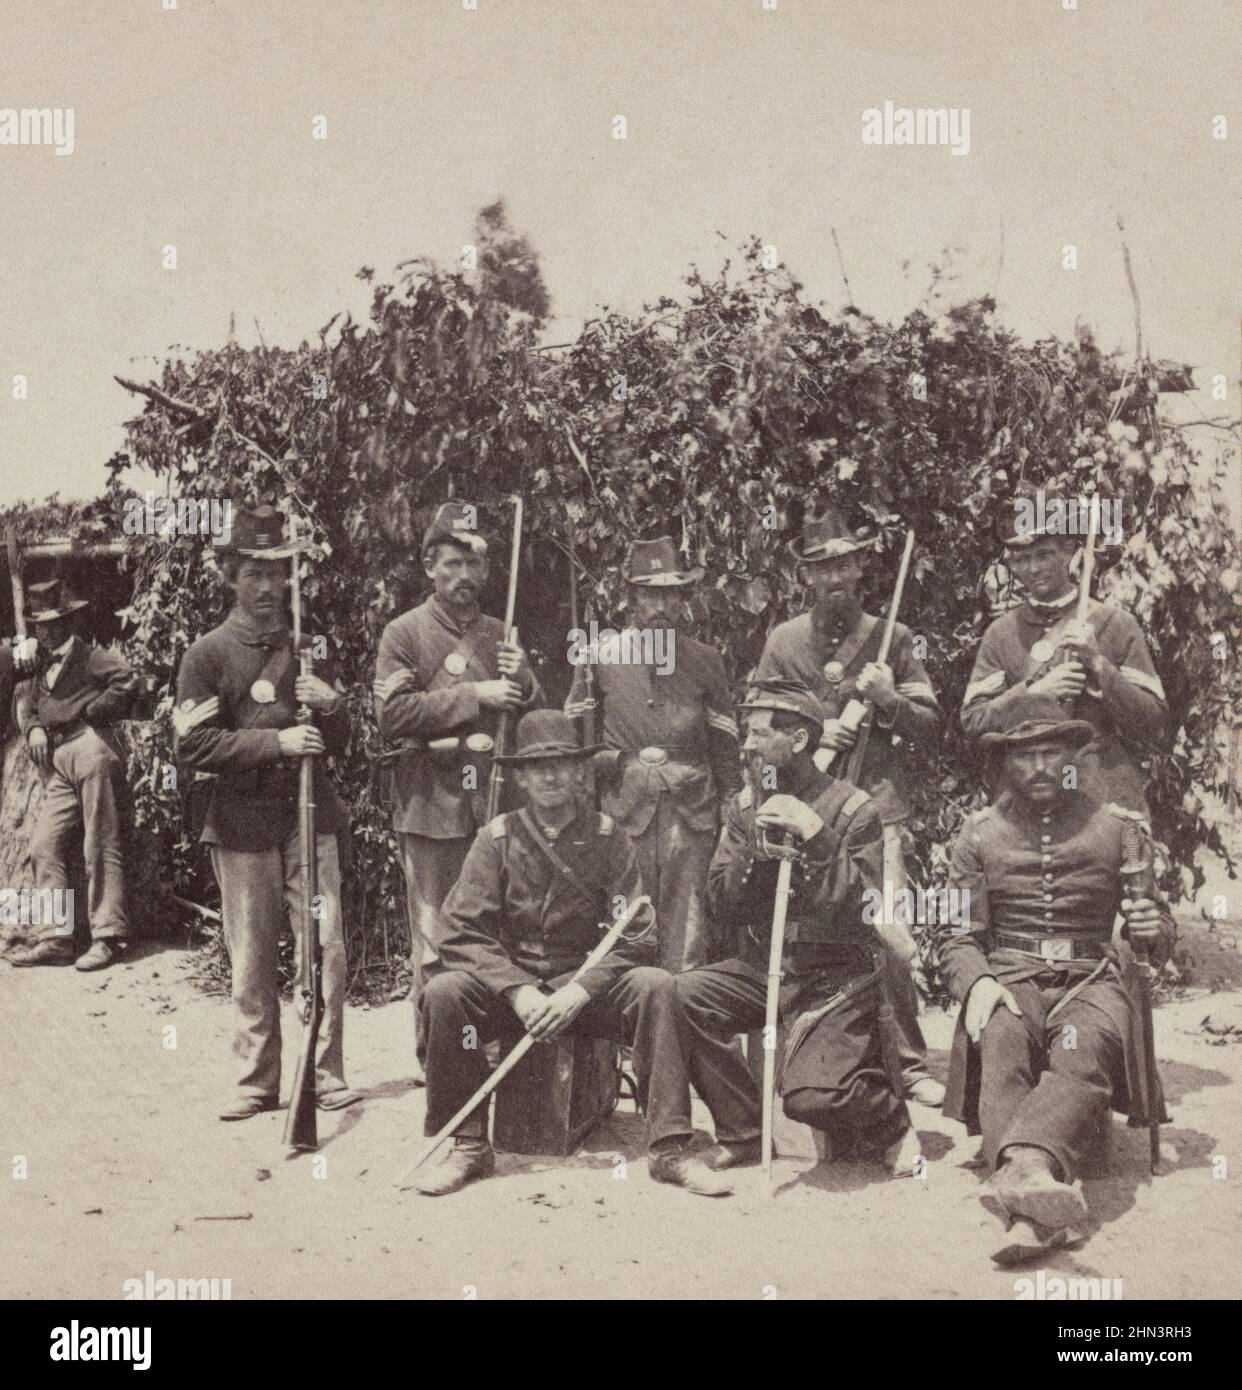 American Civil War. 1861-1865 Soldiers from the 134th Illinois Volunteer Infantry at Columbus, Kentucky holding rifles and swords. USA. 1864 Stock Photo